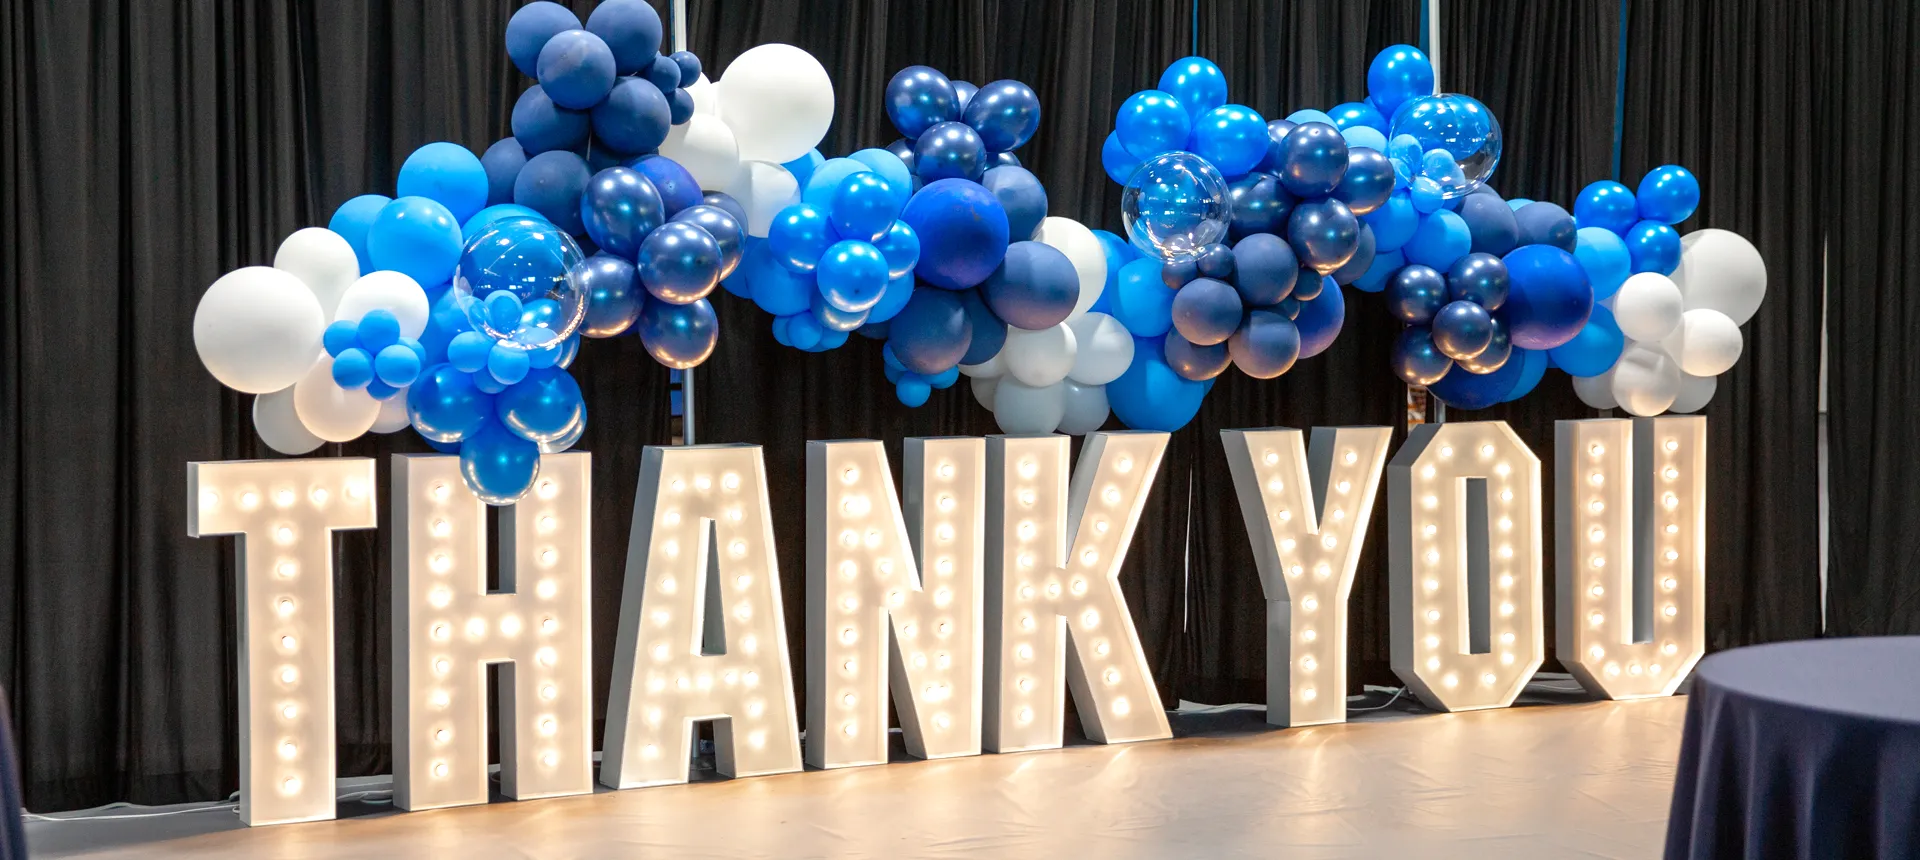 Large Thank You letters with blue balloons